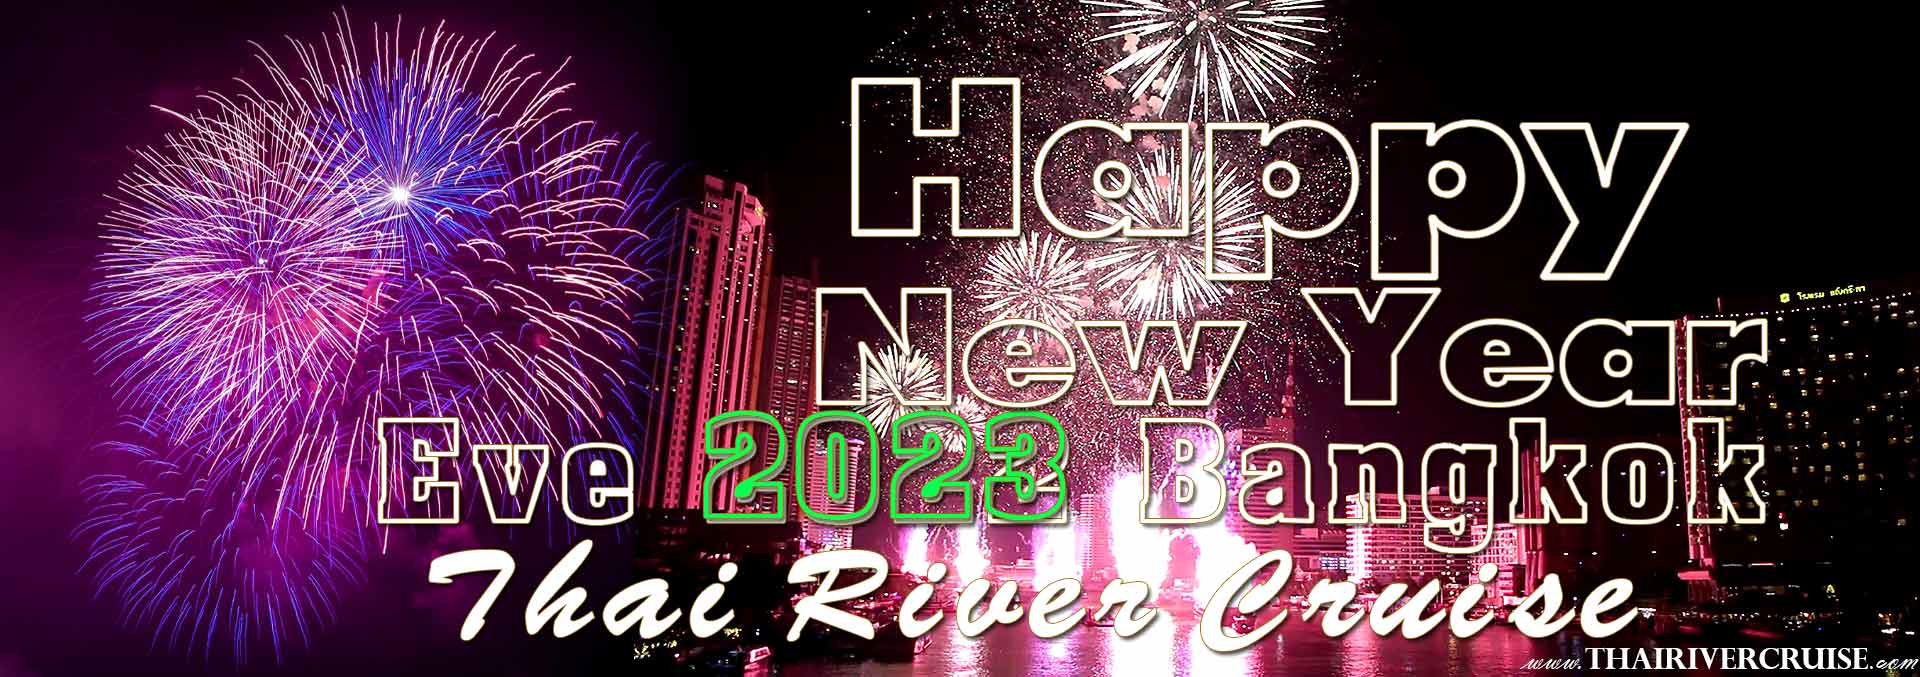 New Year Eve 2023 Bangkok Fireworks  New Years Eve Bangkok 2023 Dinner Countdown River Cruise on the Chao Phraya River Bangkok Thailand on  Saturday 31 December 2022 What are the best new year cruises in Thailand?